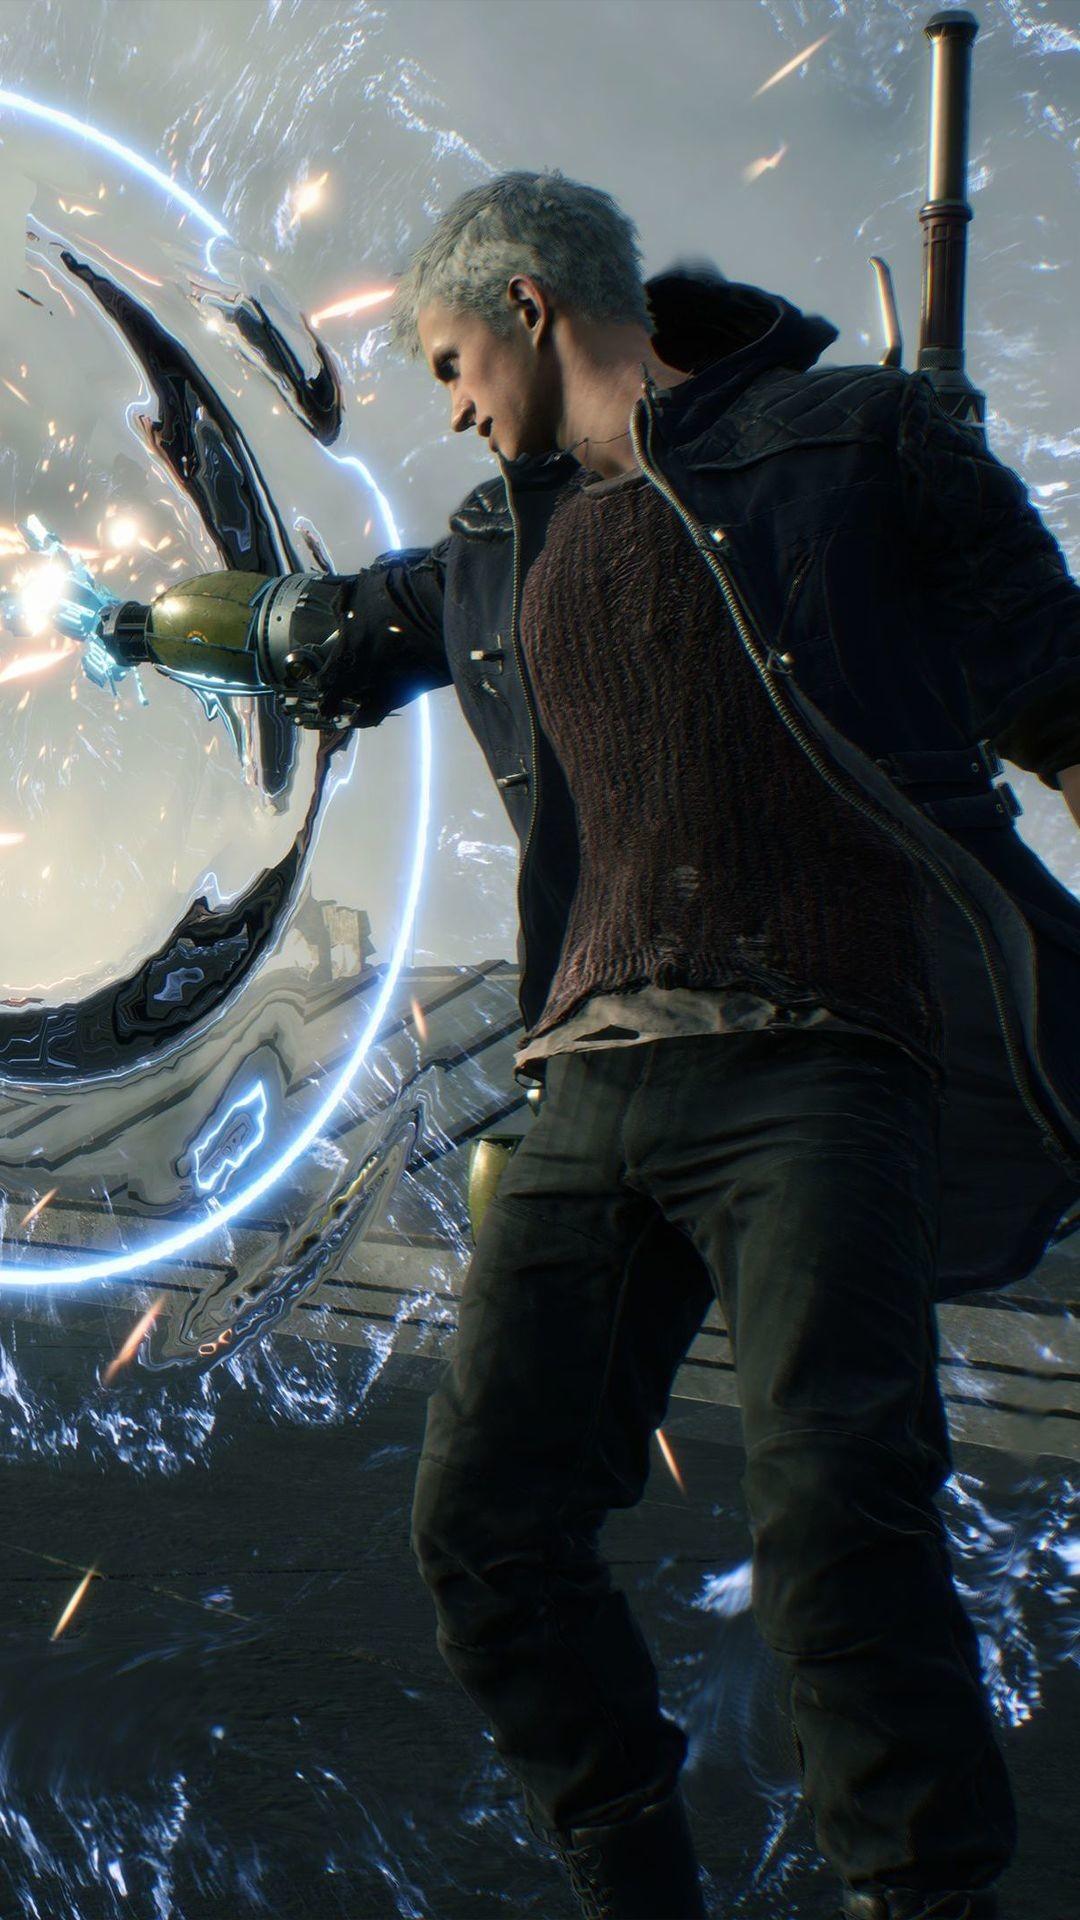 Devil May Cry 5 Phone Wallpapers - Wallpaper Cave